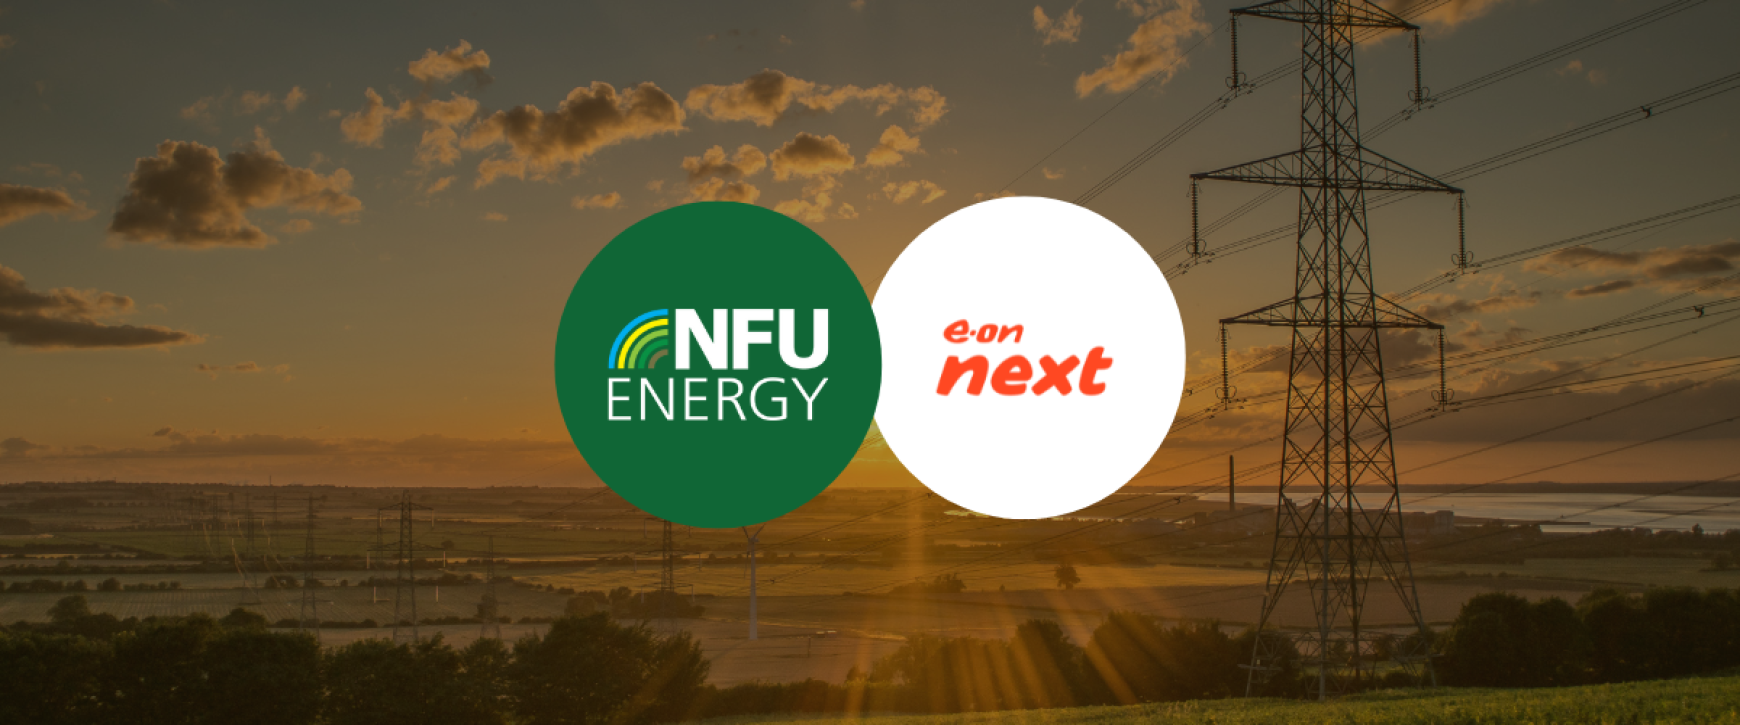 NFU Energy Announces the Upcoming E.ON Next Buying Group: Are You Ready to Join for Savings and Sustainability?